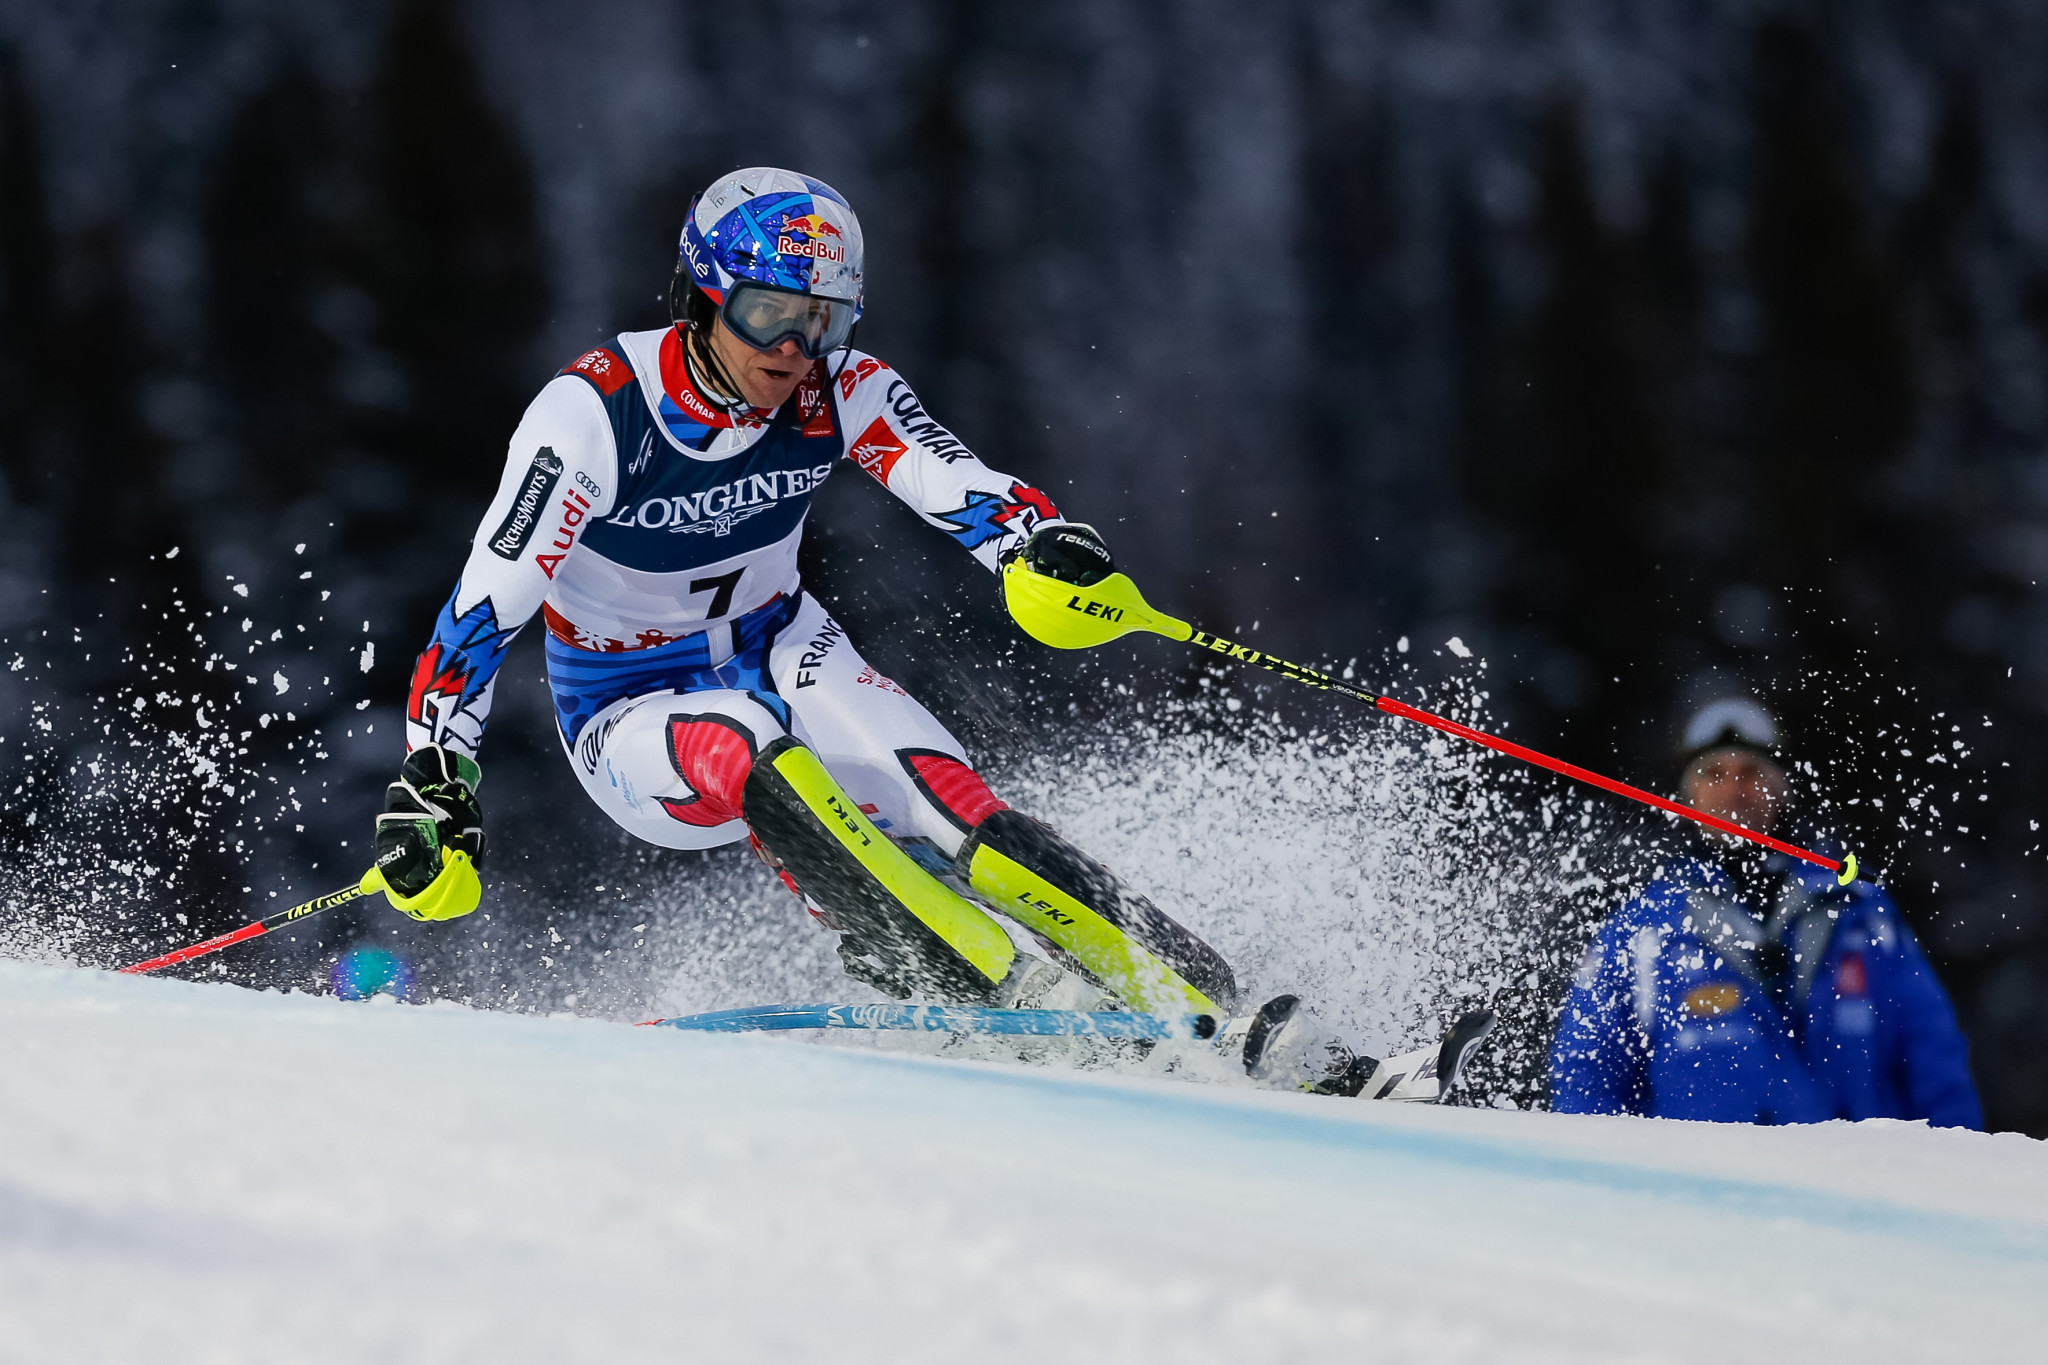 Alexis Pinturault used his slalom skill to move into gold medal position ©Getty Images